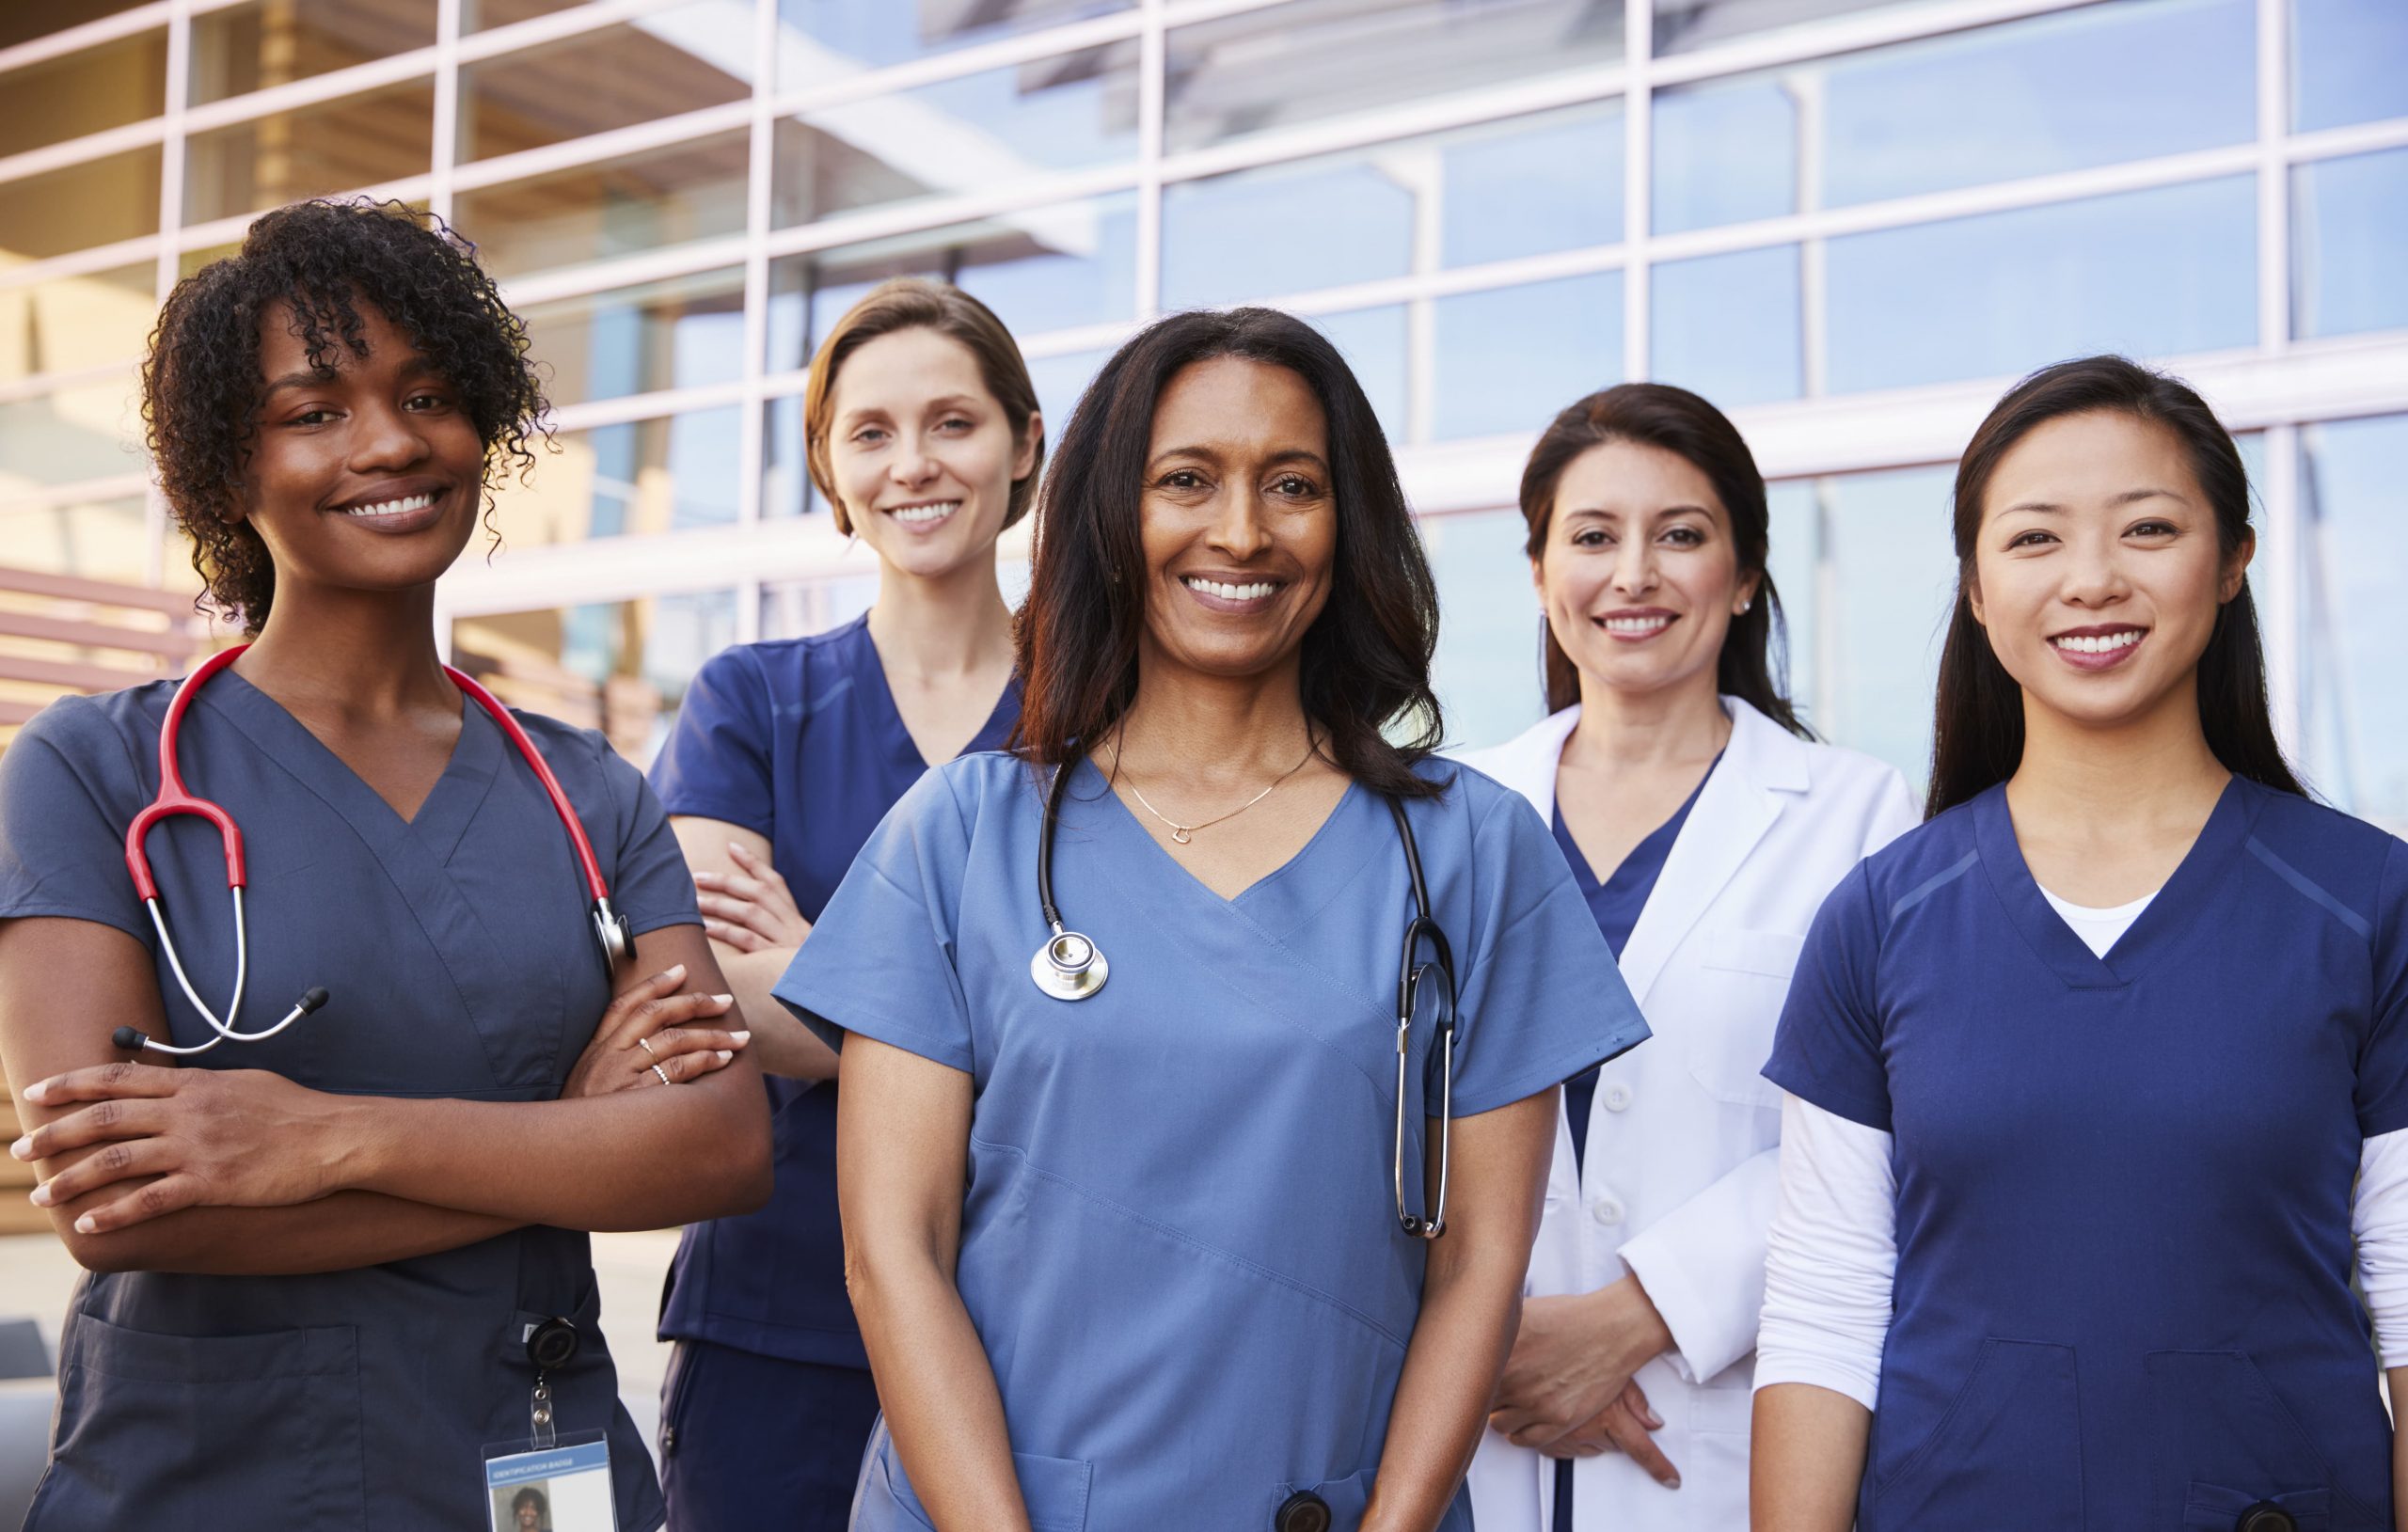 Group of multi racial women medical professionals